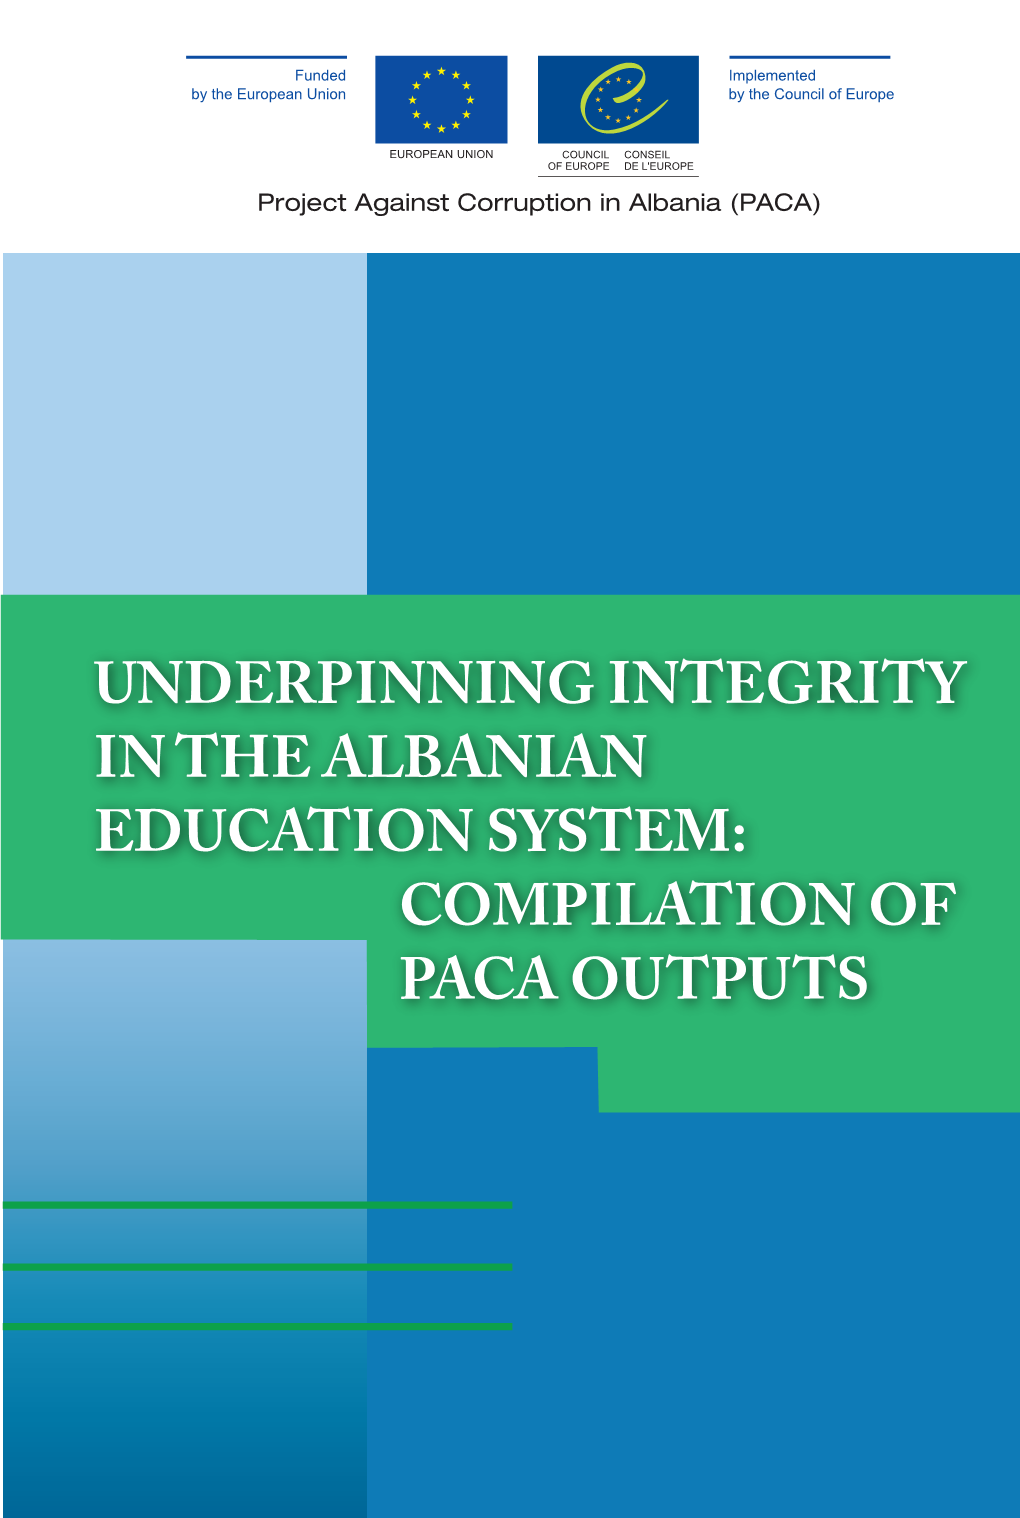 Underpinning Integrity in the Albanian Education System: Compilation of Paca Outputs Project Against Corruption in Albania (Paca)